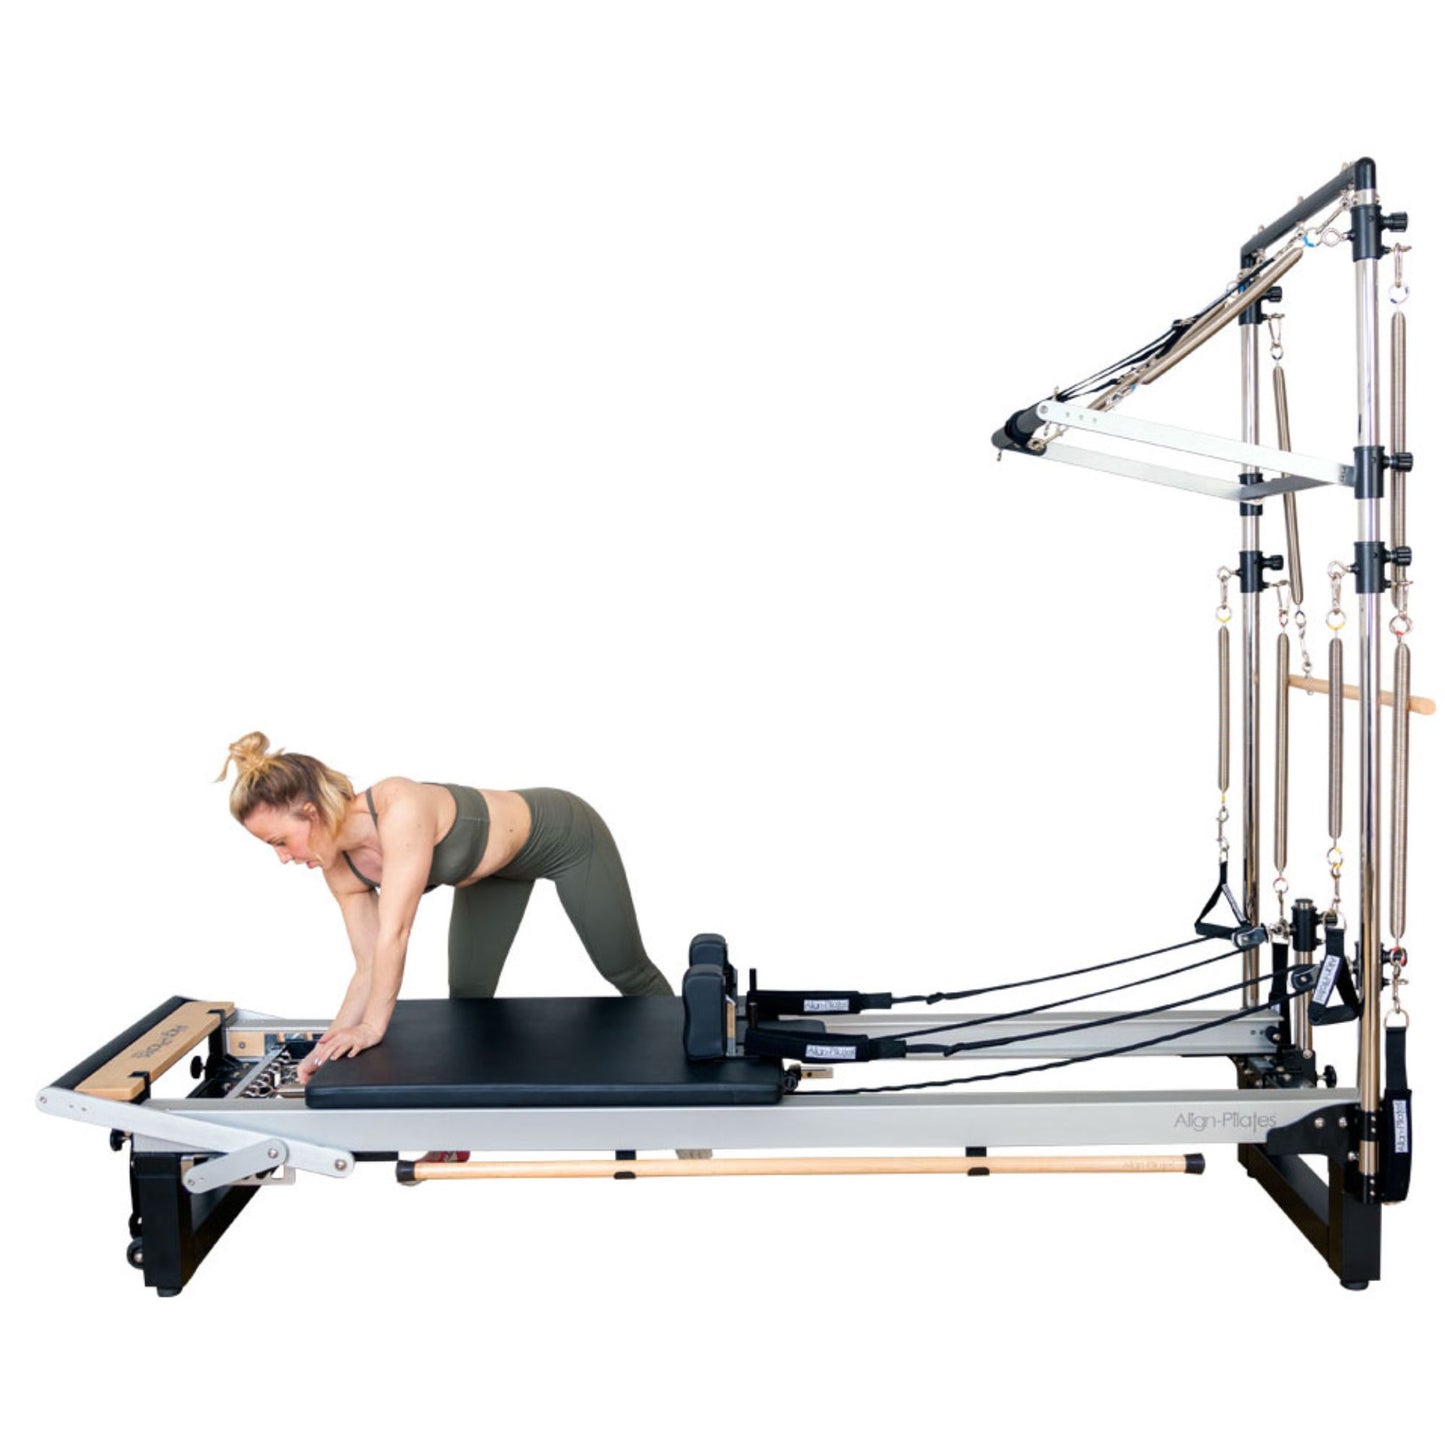 Align-Pilates M8-Pro RC Wood Reformer with Half-Cadillac Tower